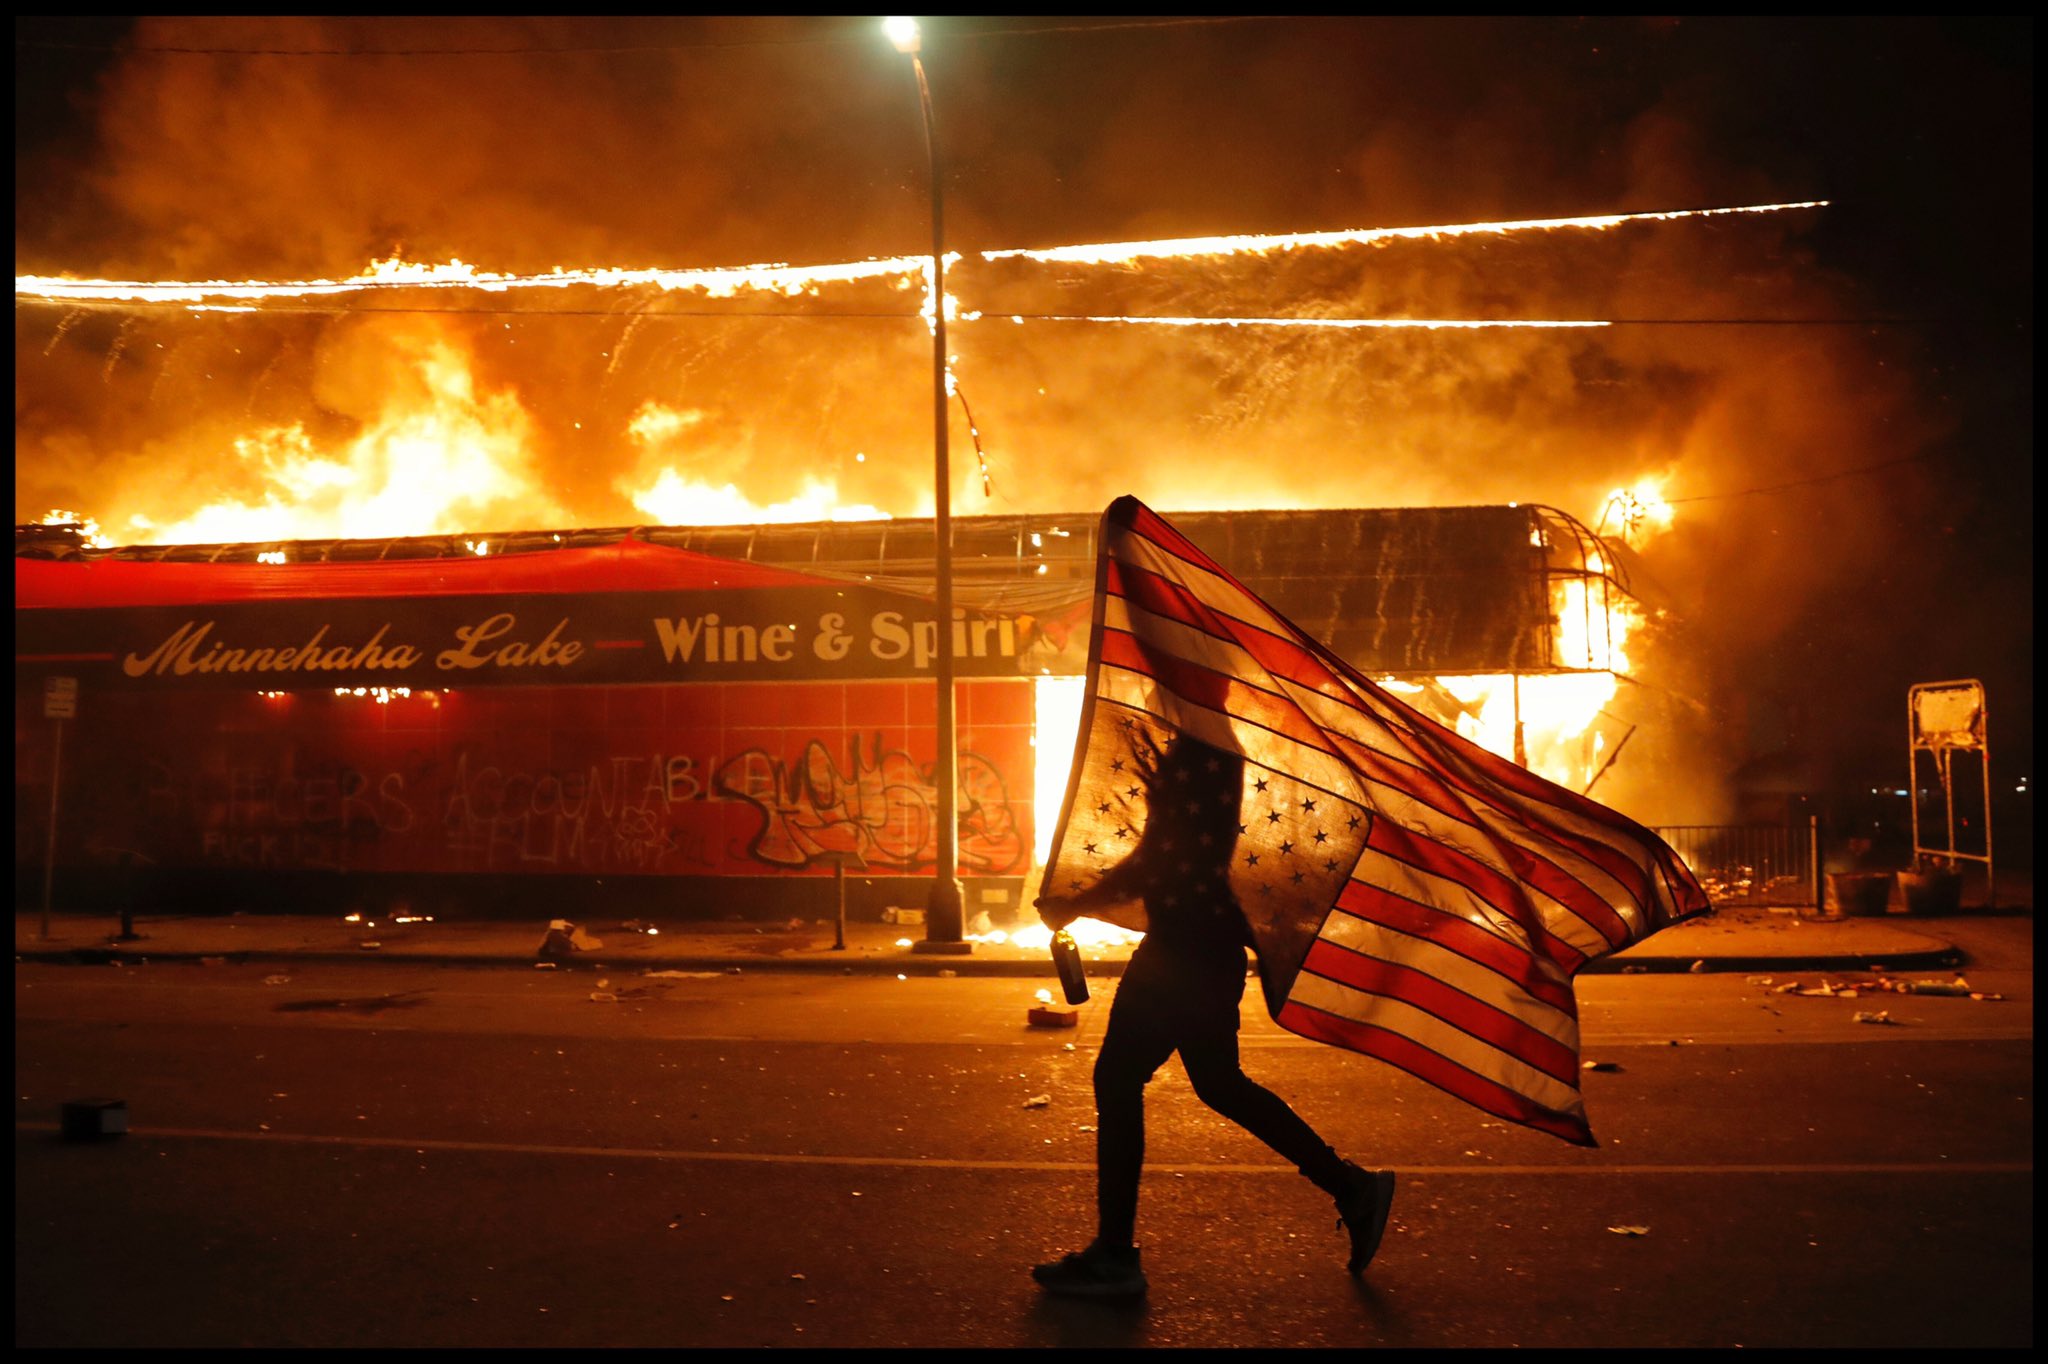 A protester carries a U.S. flag upside-down, a sign of distress, next to a burning building Thursday, May 28, 2020, in Minneapolis. Protests over the death of George Floyd, a black man who died in police custody Monday, broke out in Minneapolis for a third straight night.